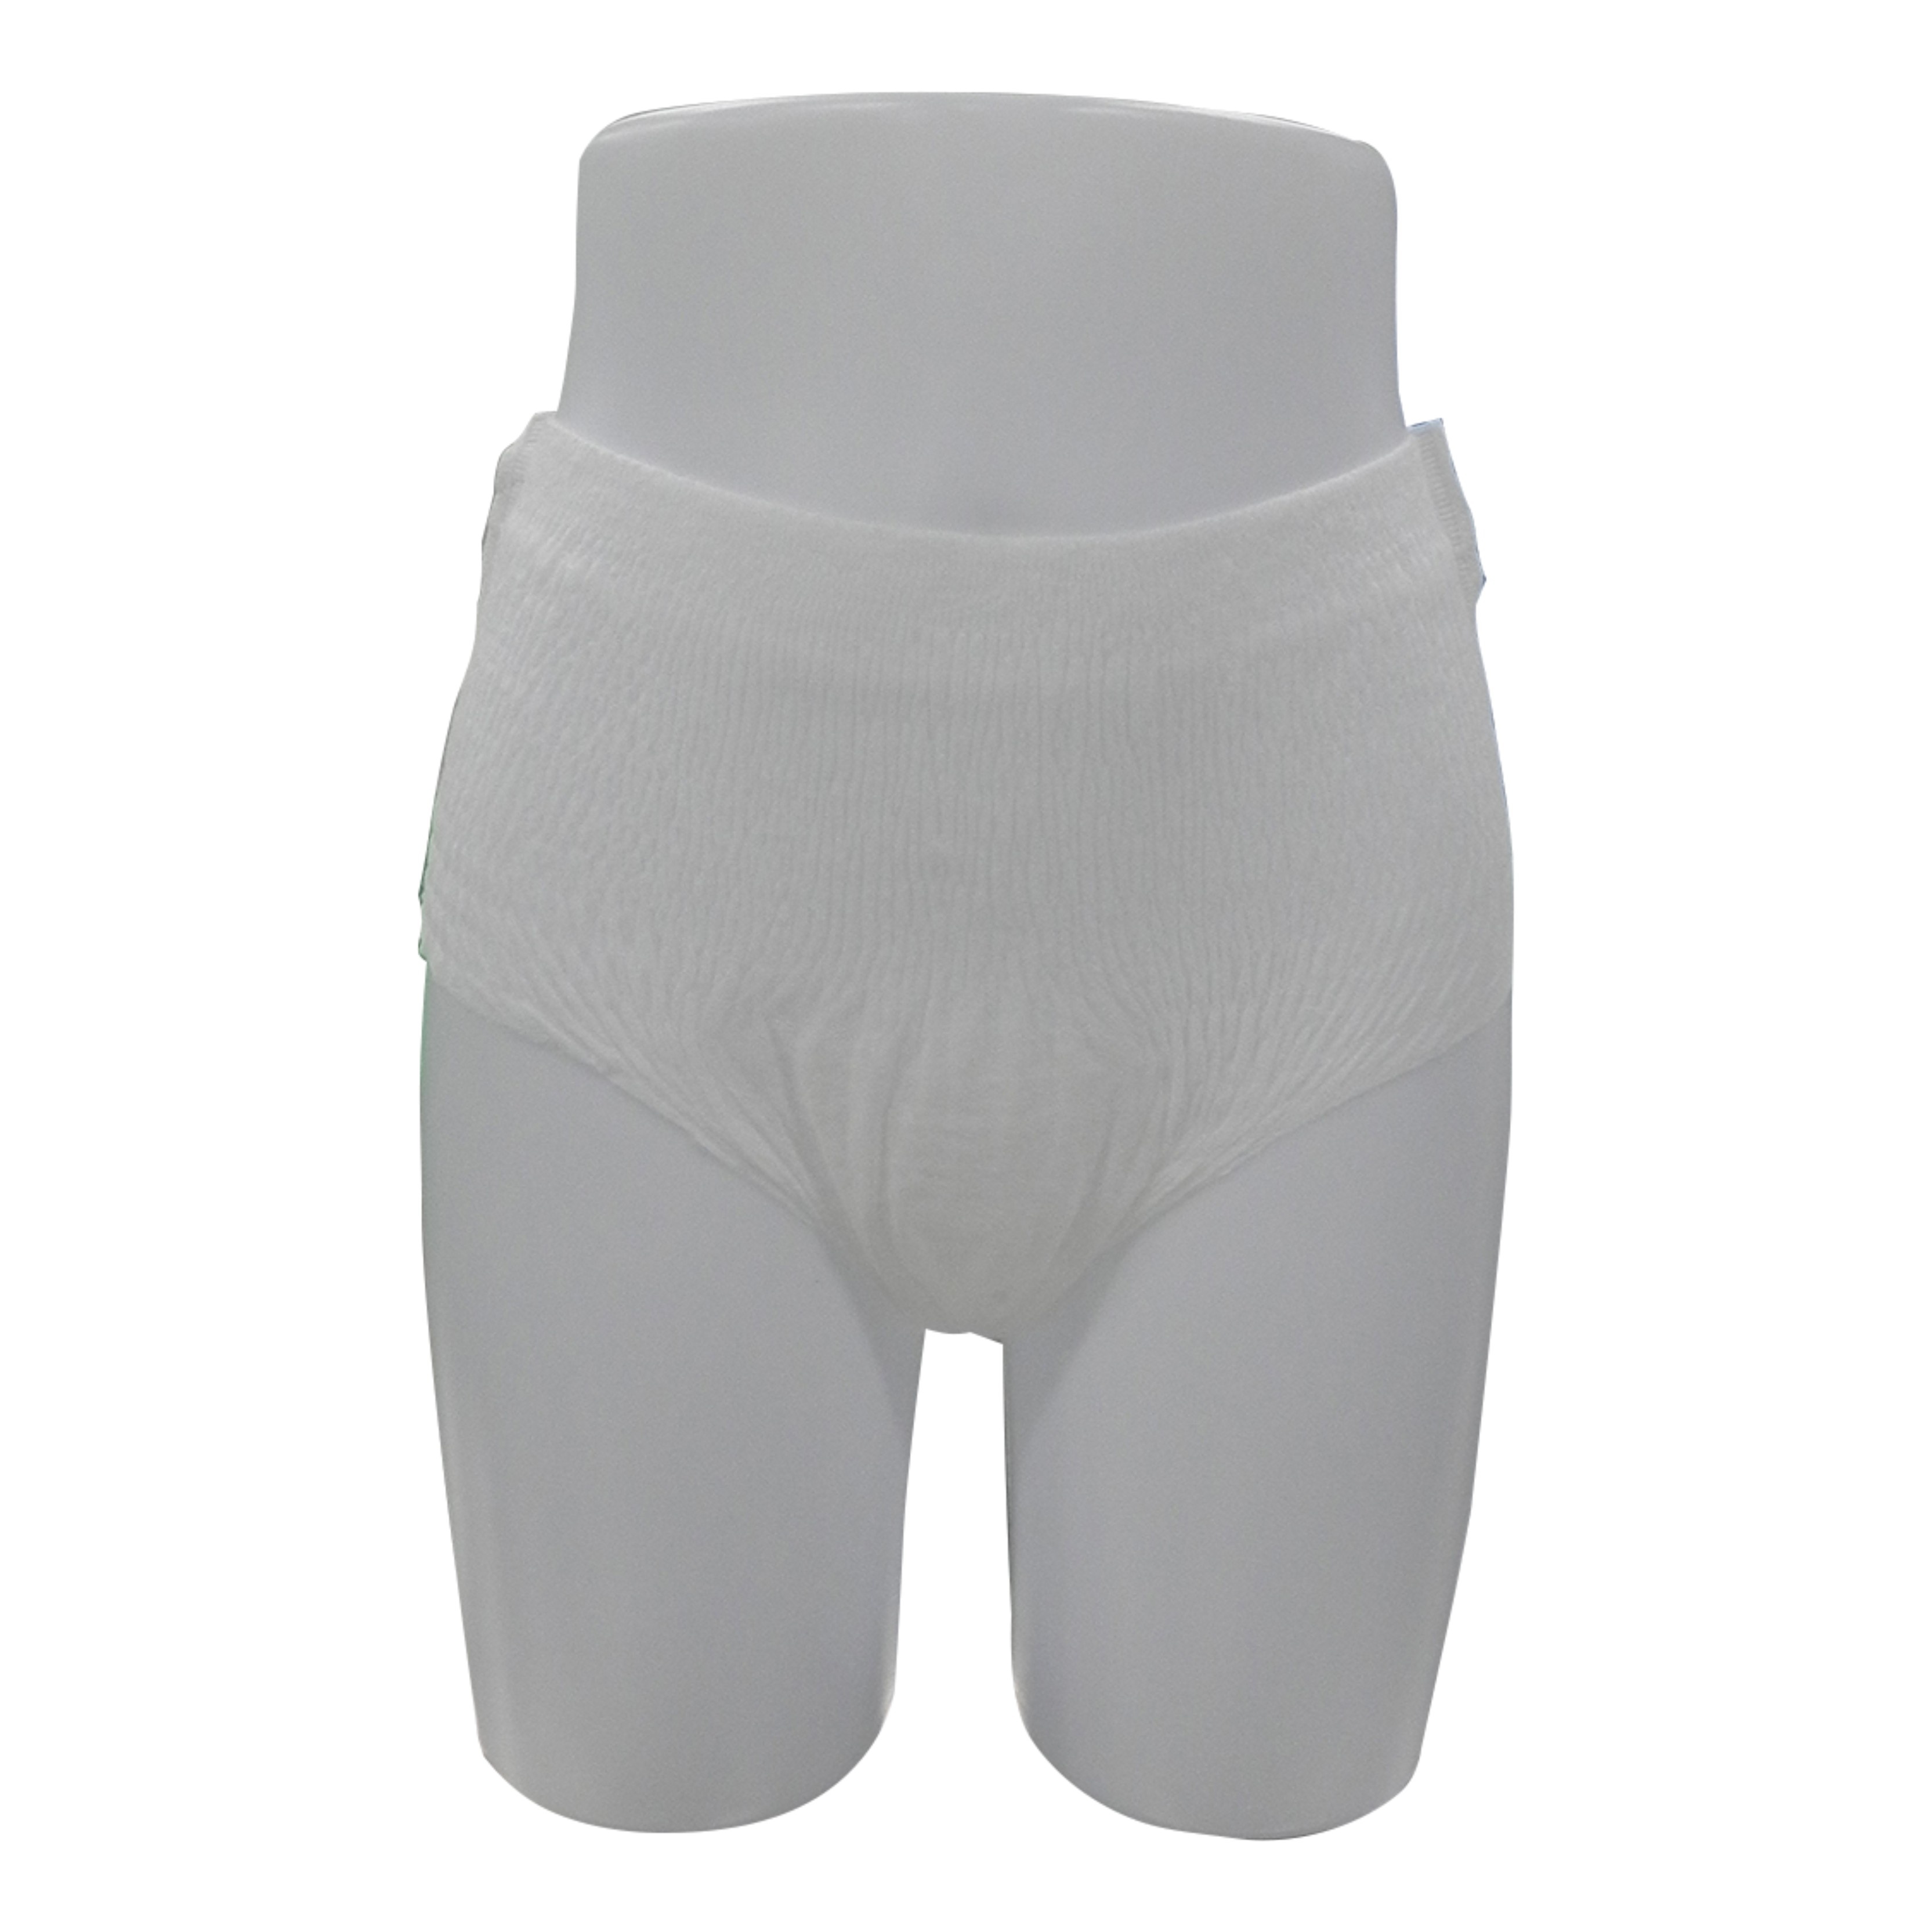 Disposable Soft Cotton Ultra-thin Soft Lady Menstrual Period Pants